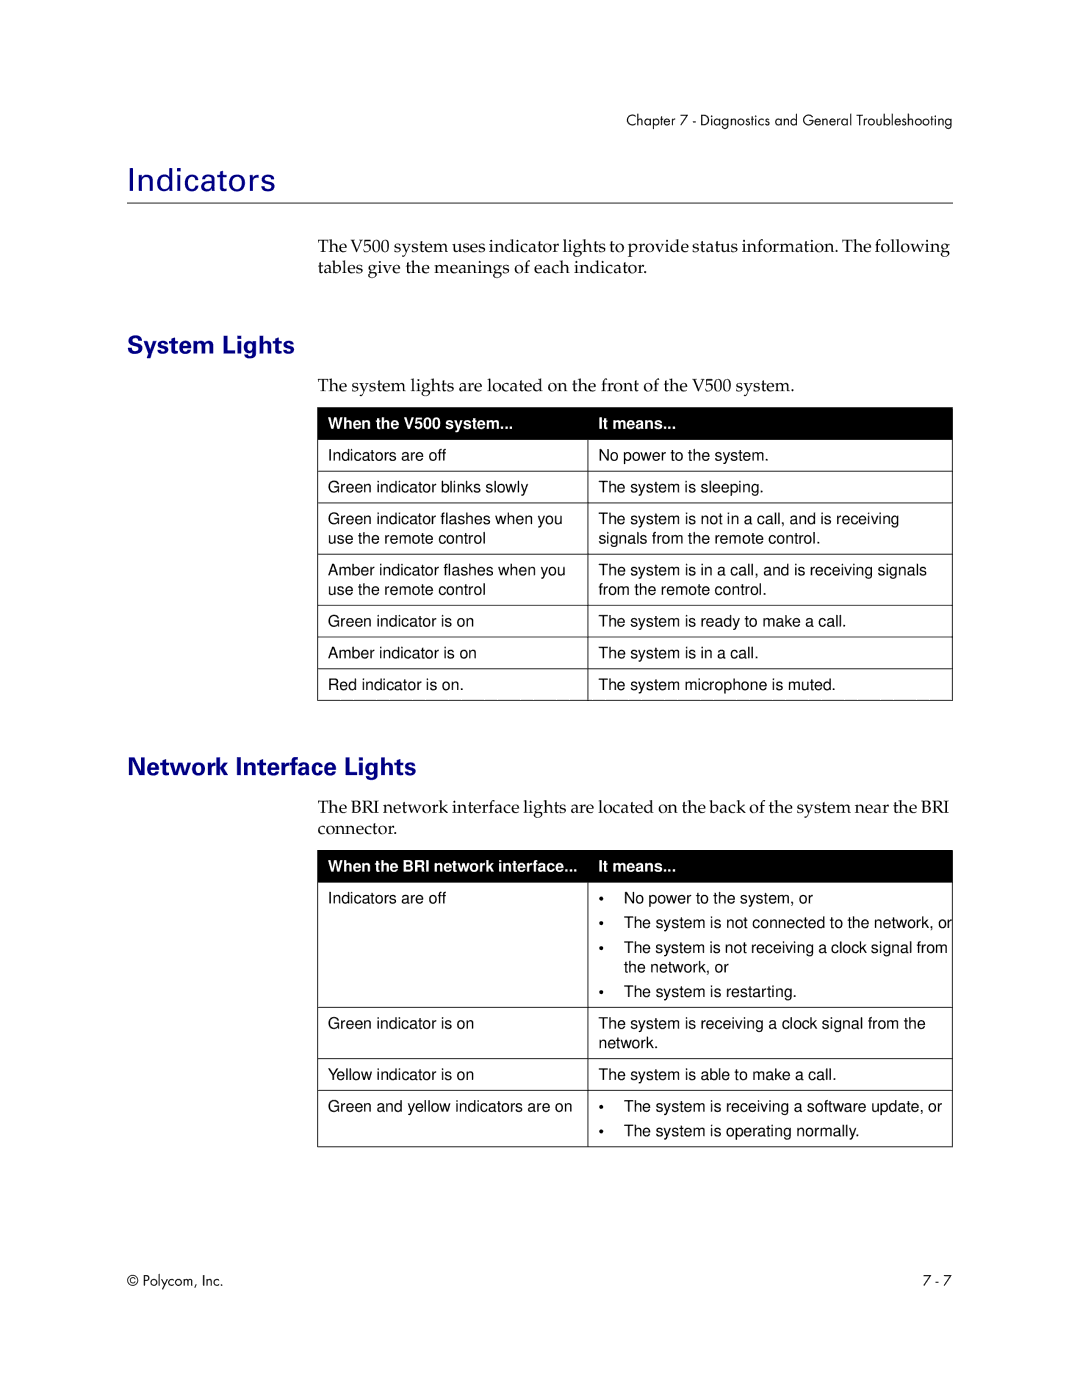 Polycom manual Indicators, System Lights, Network Interface Lights, When the V500 system It means 